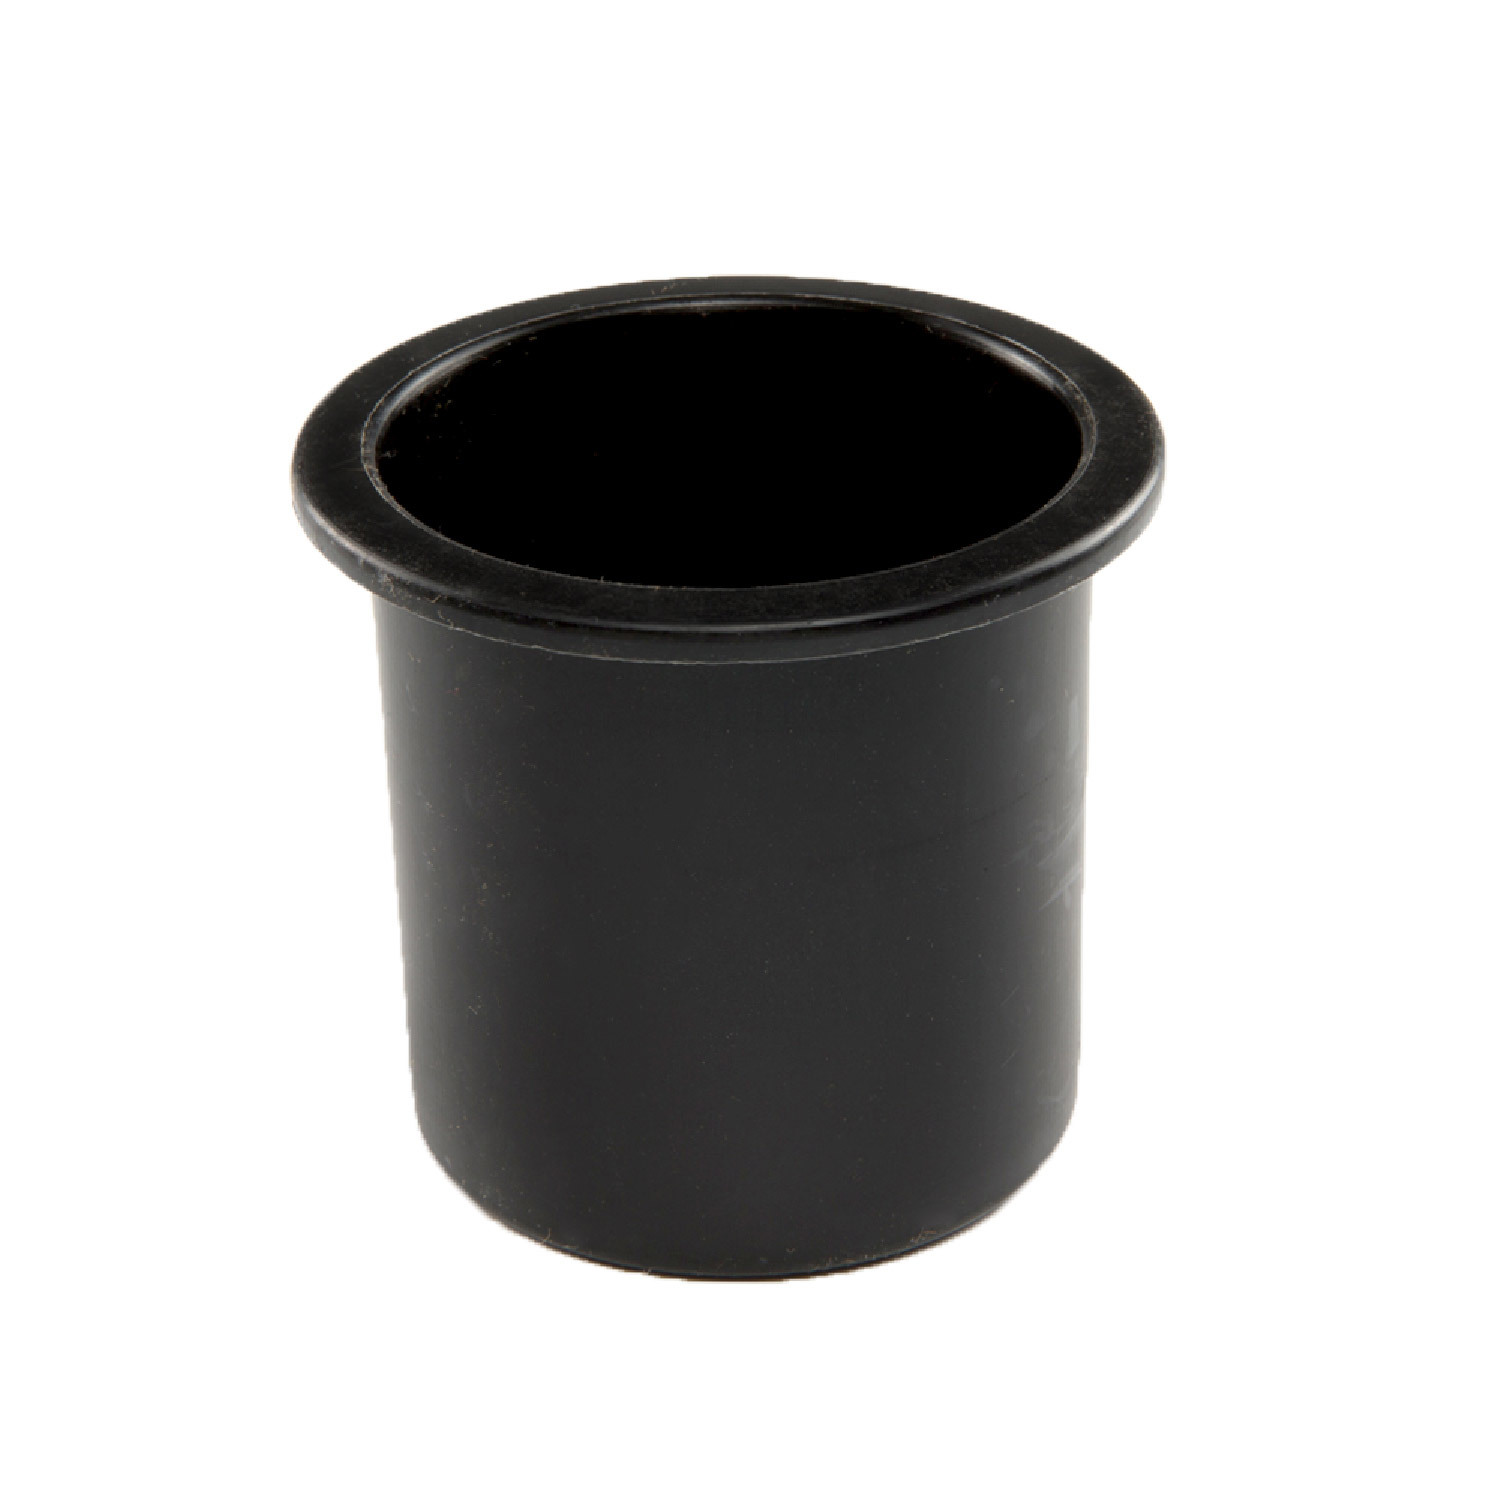 Piper cup holder 911763